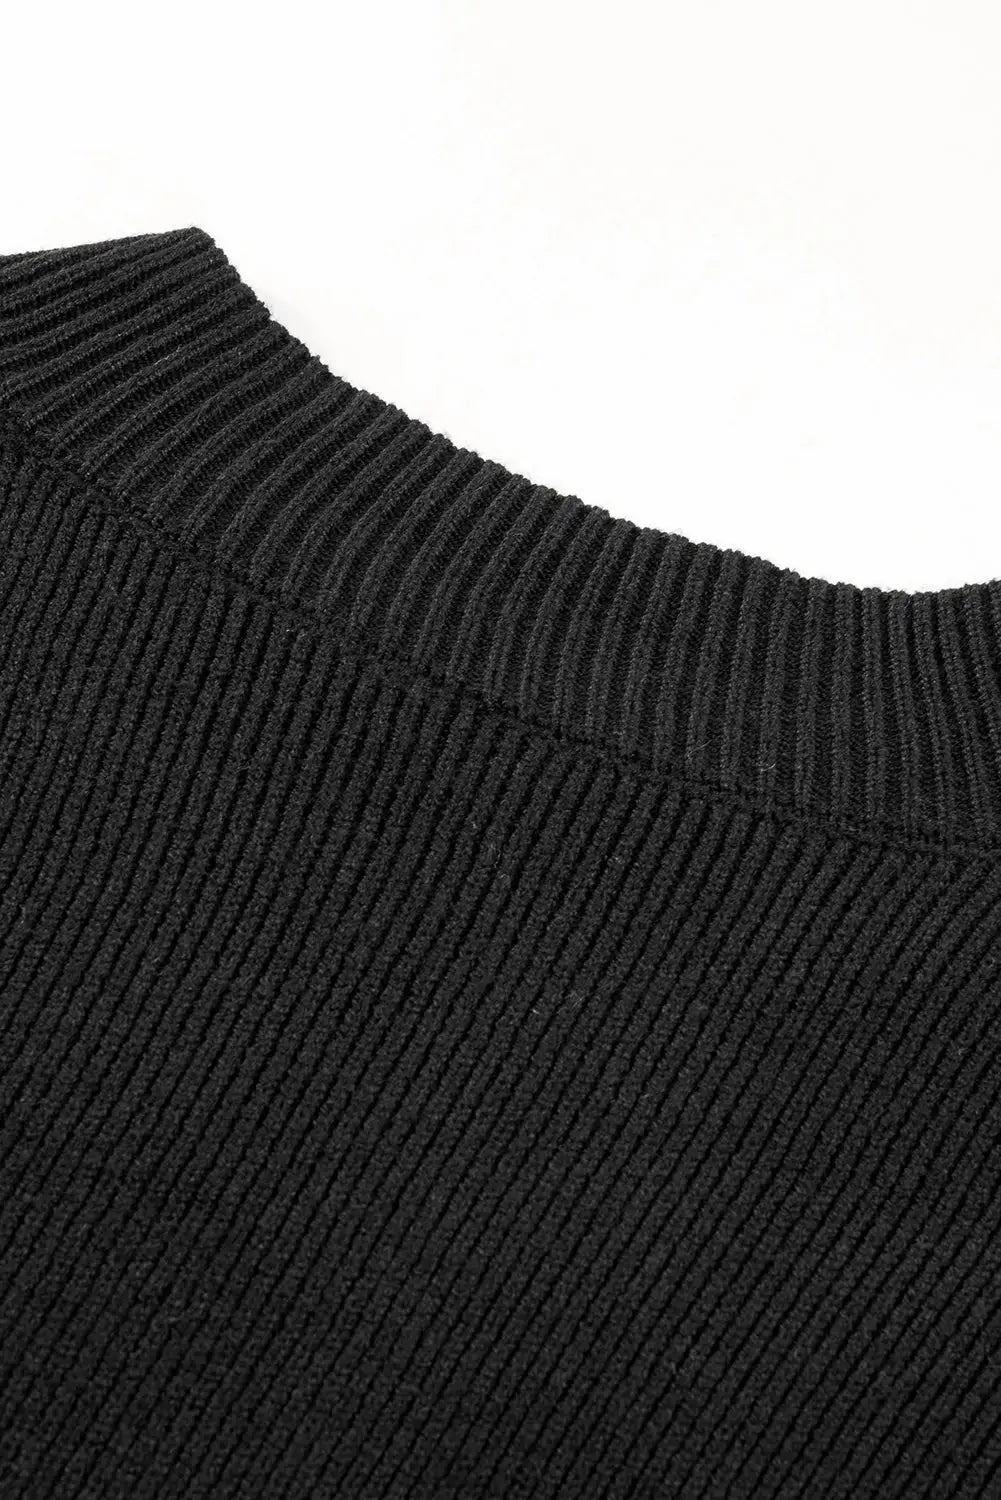 Black oversized drop shoulder bubble sleeve pullover sweater - tops